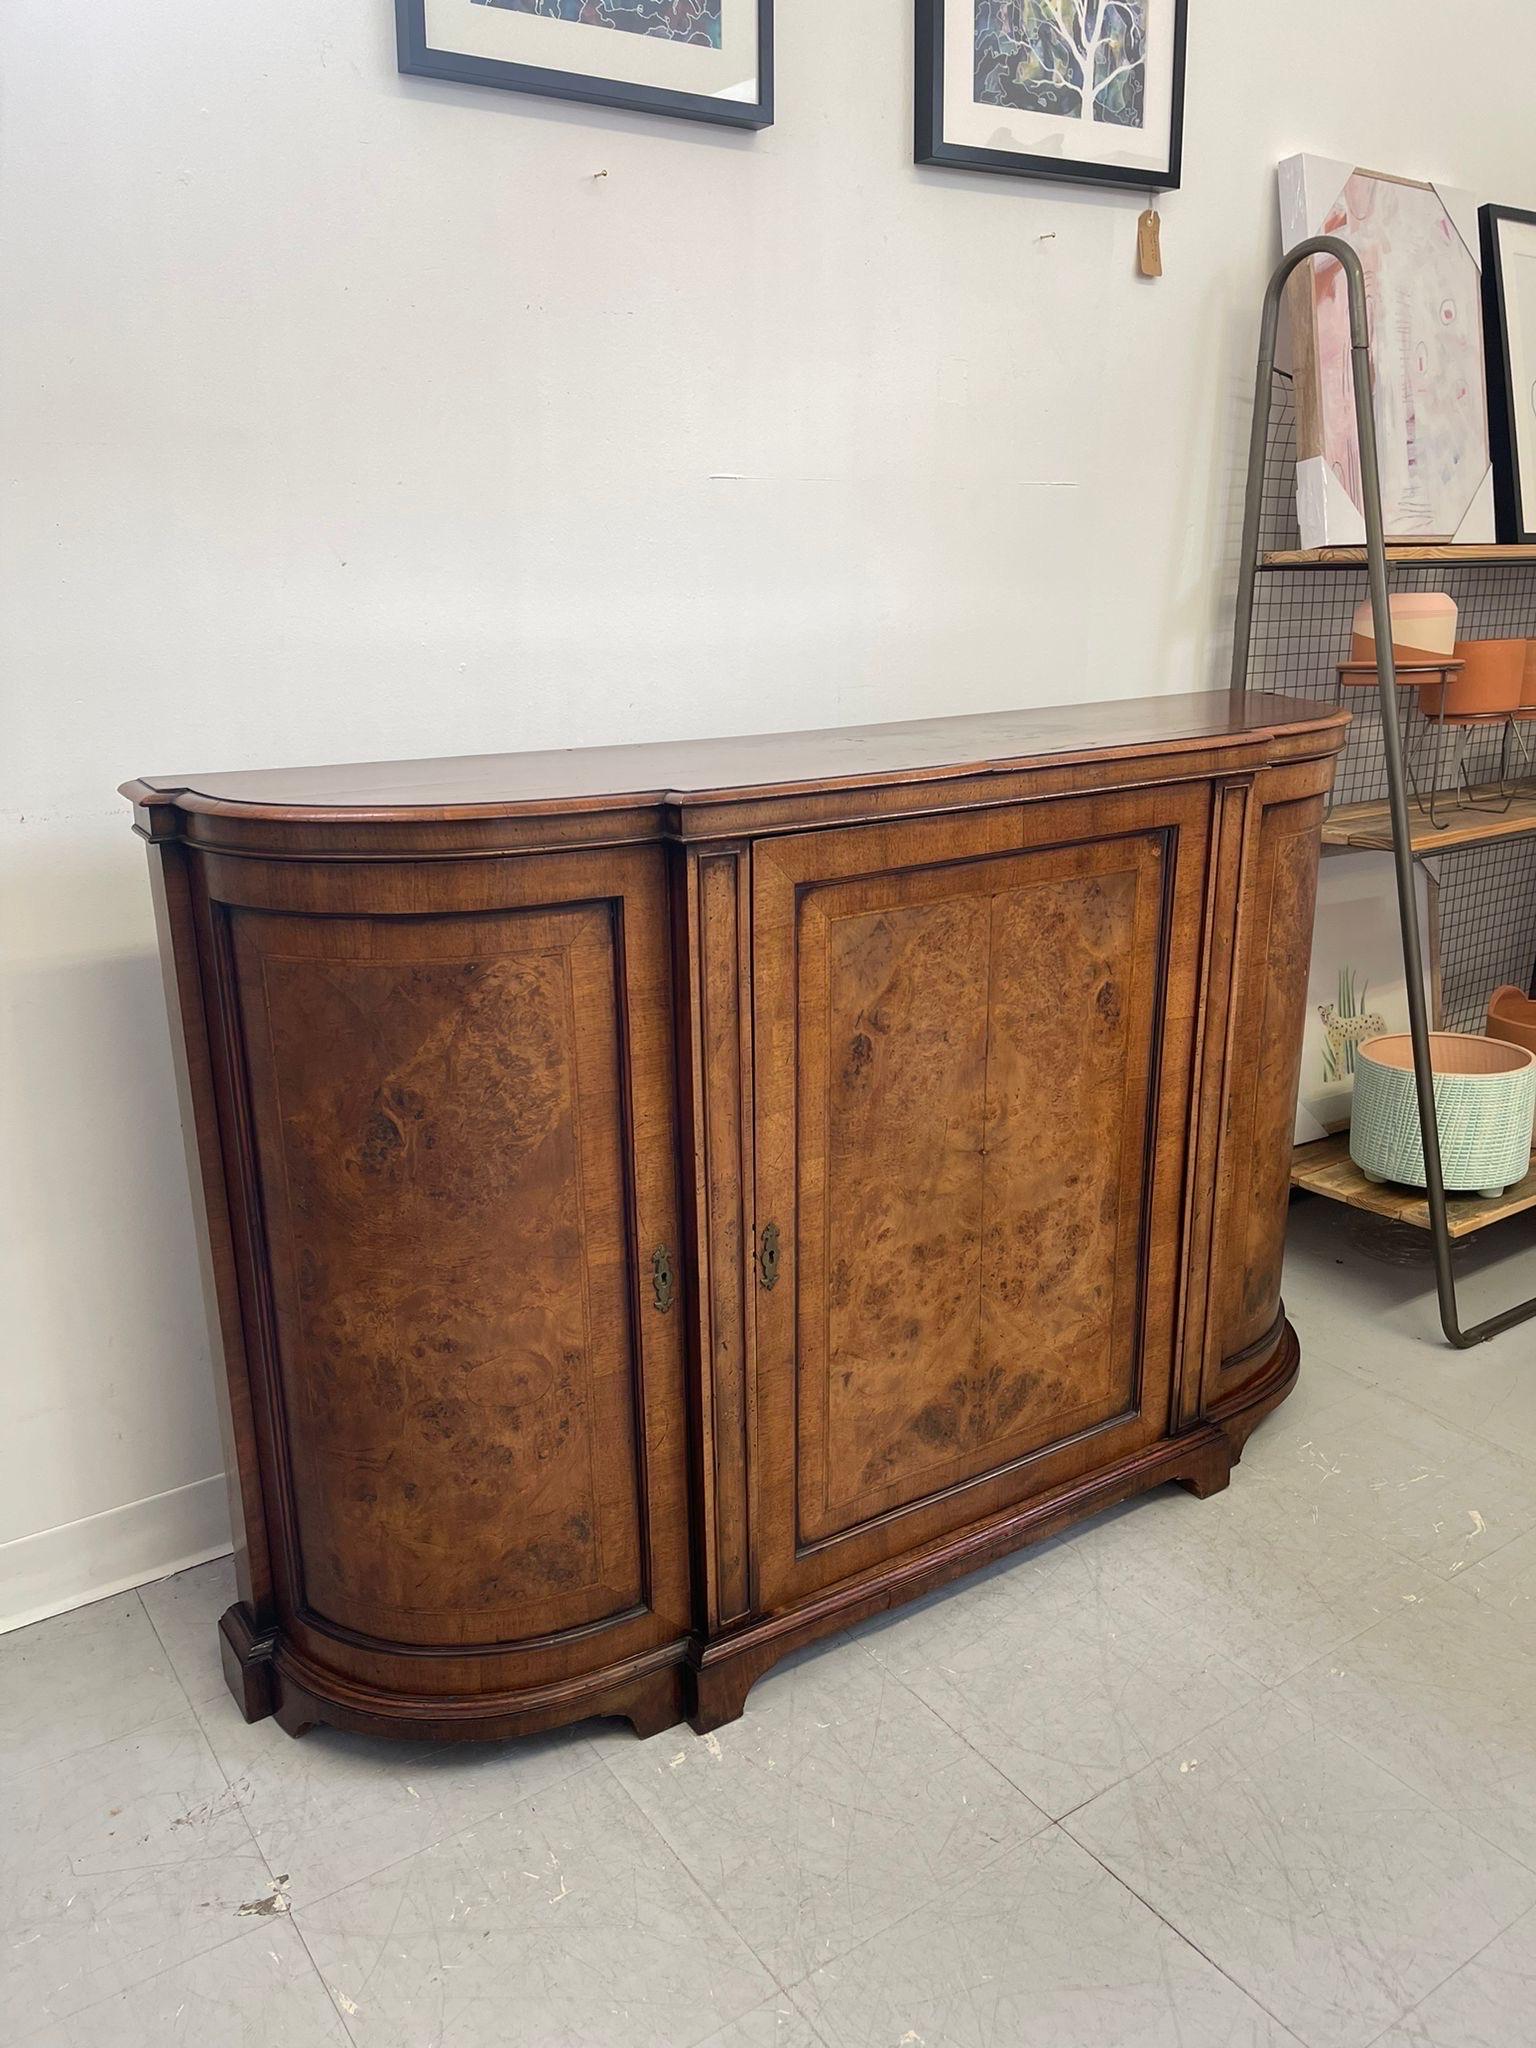 This beautiful Burl Accented piece has wood inlay features throughout. Wood has aged beautifully. Possibly Pre 1950s as wood seems to be hand-paned. The cabinetry backing is velvet lined with stable shelving in each section. Original keys with